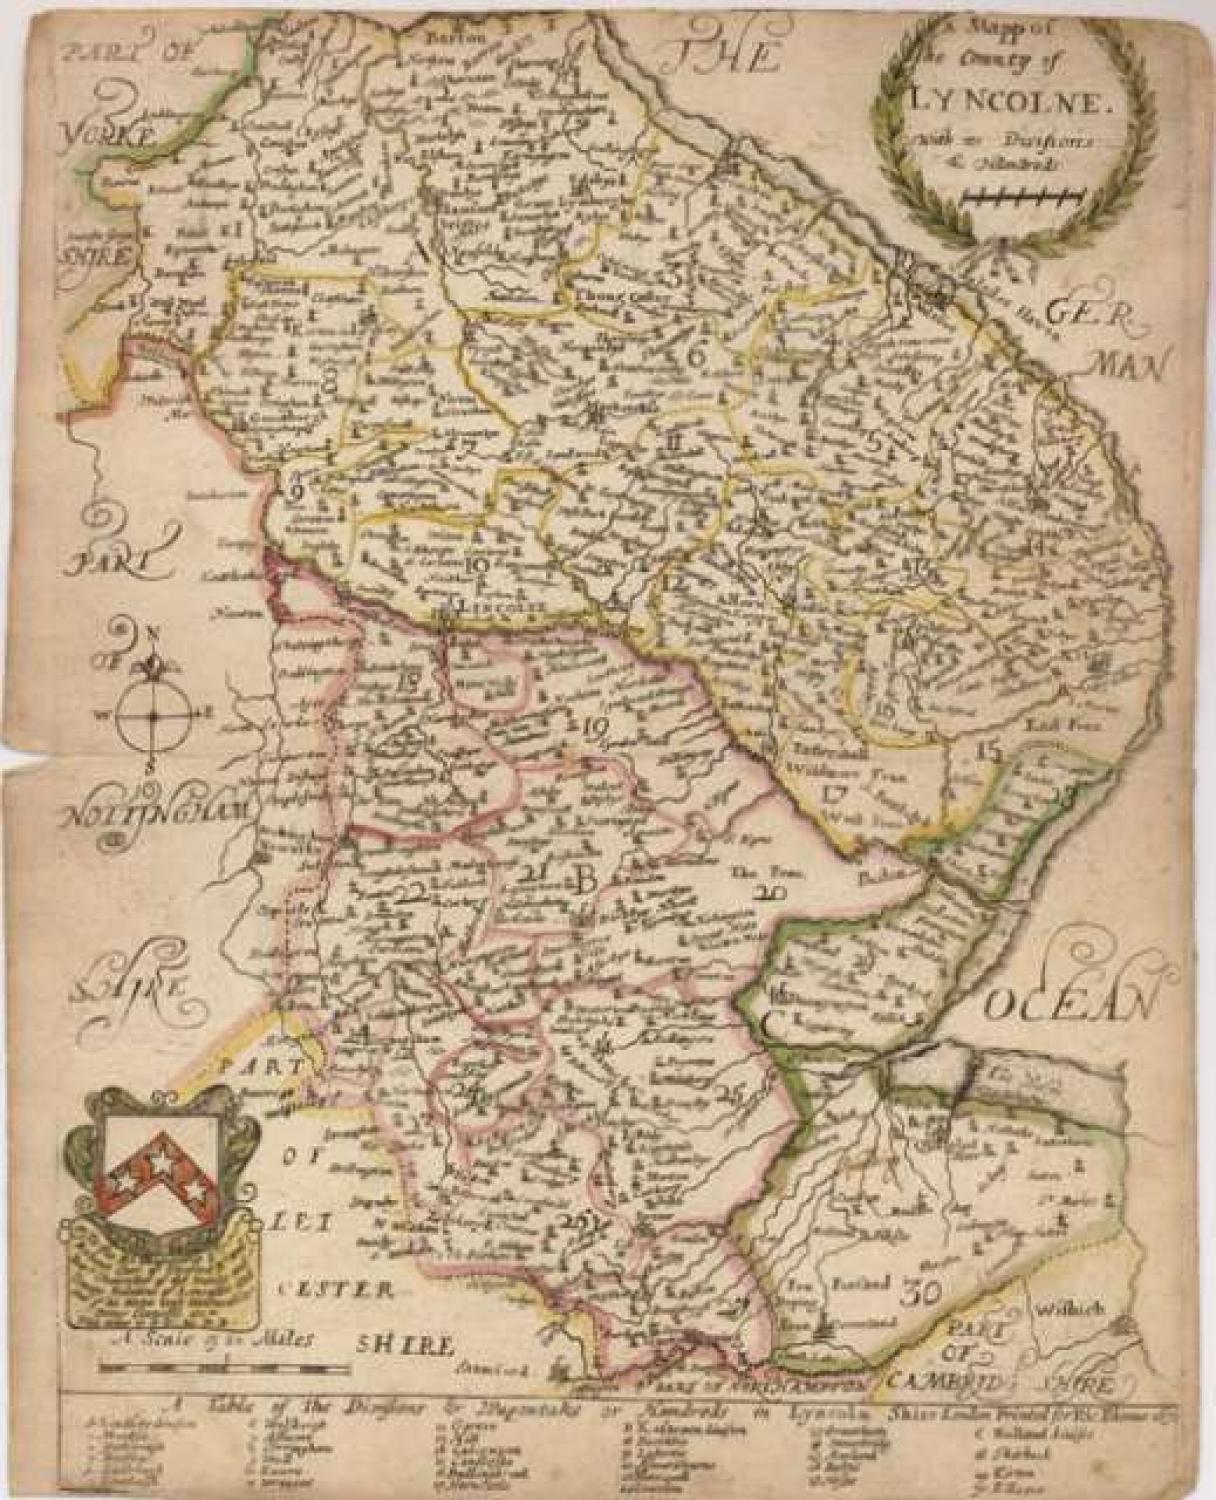 Blome - A Mapp of the County of Lyncolne